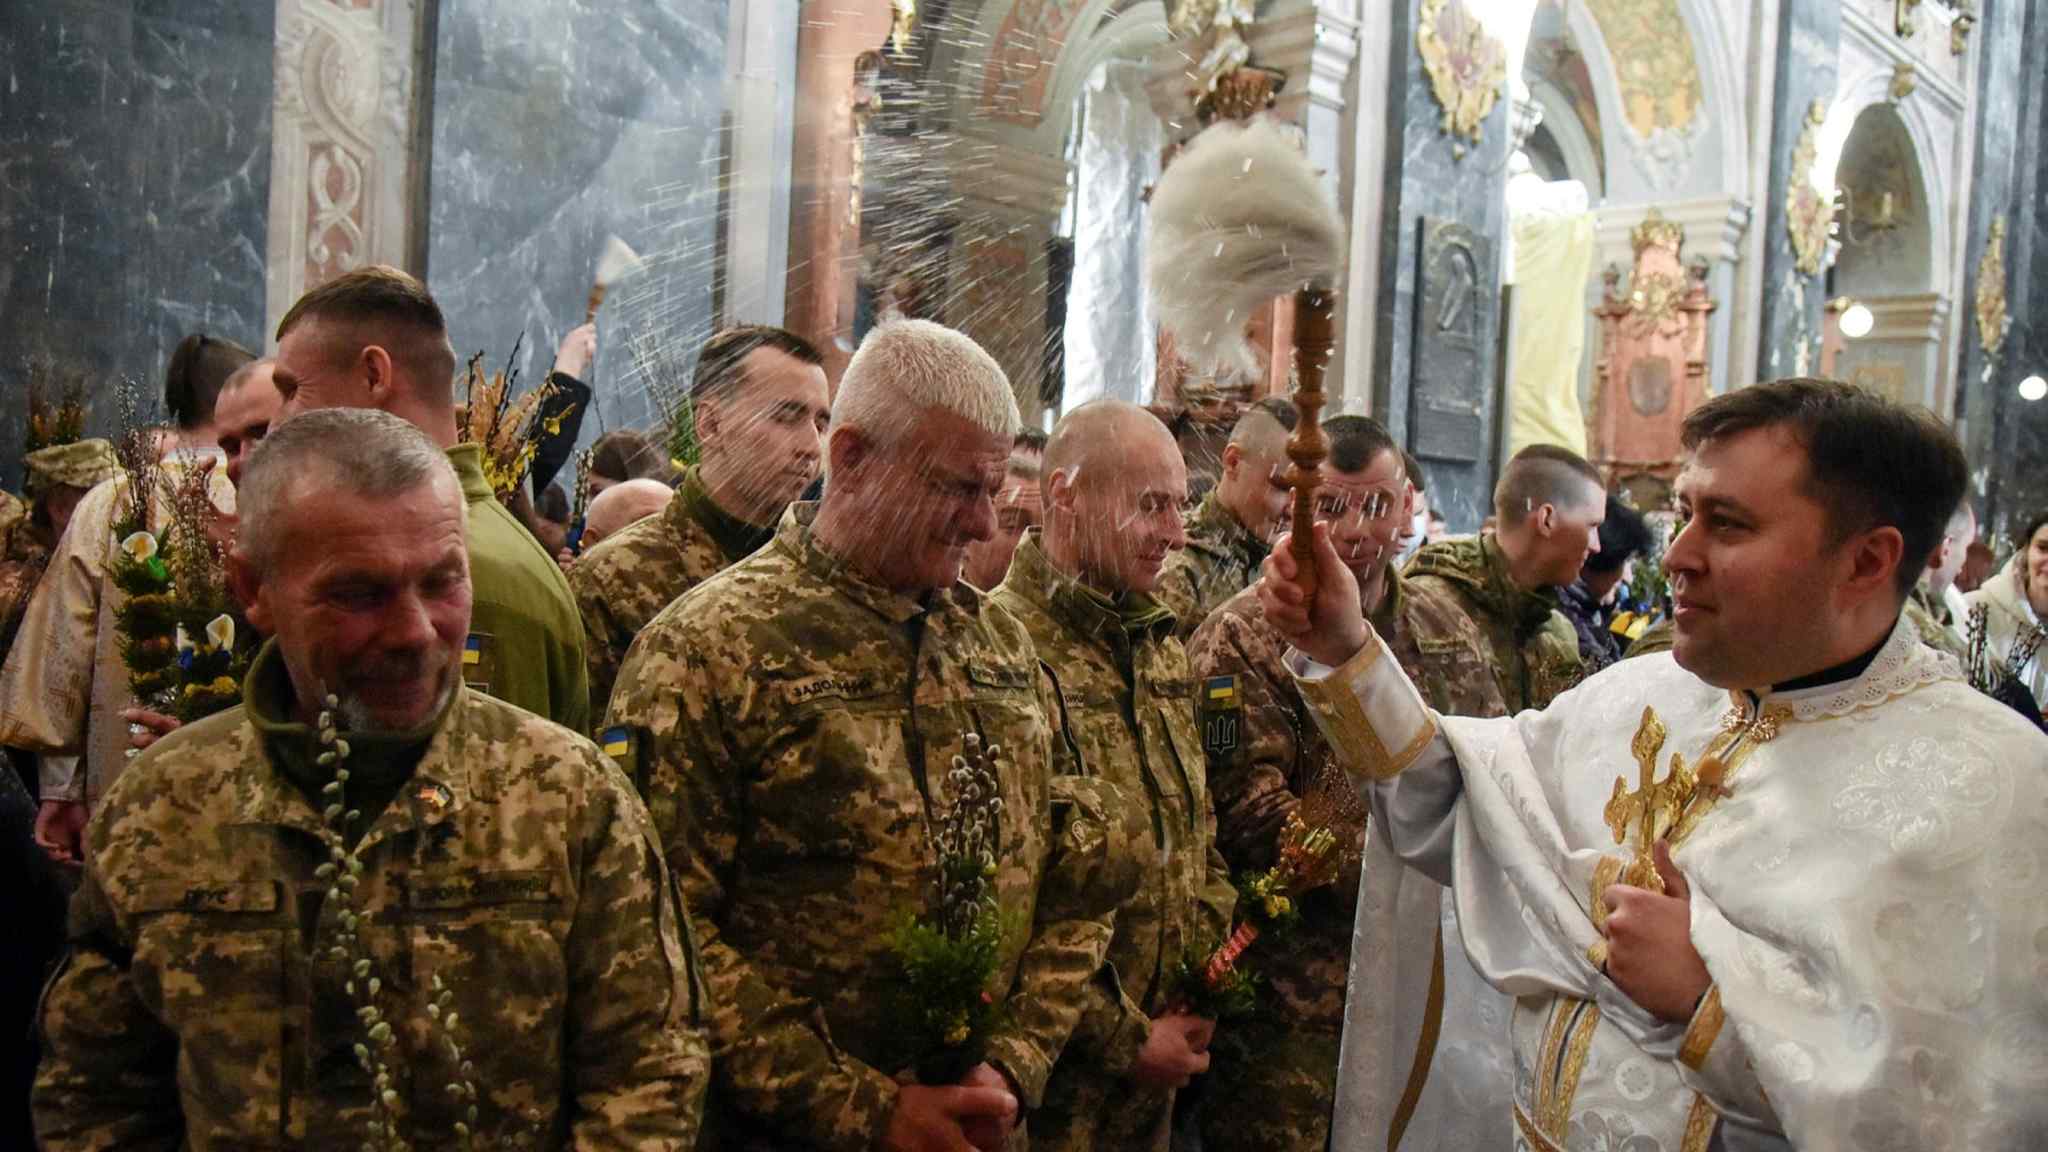 War costs Russia its influence with Ukraine’s Orthodox believers